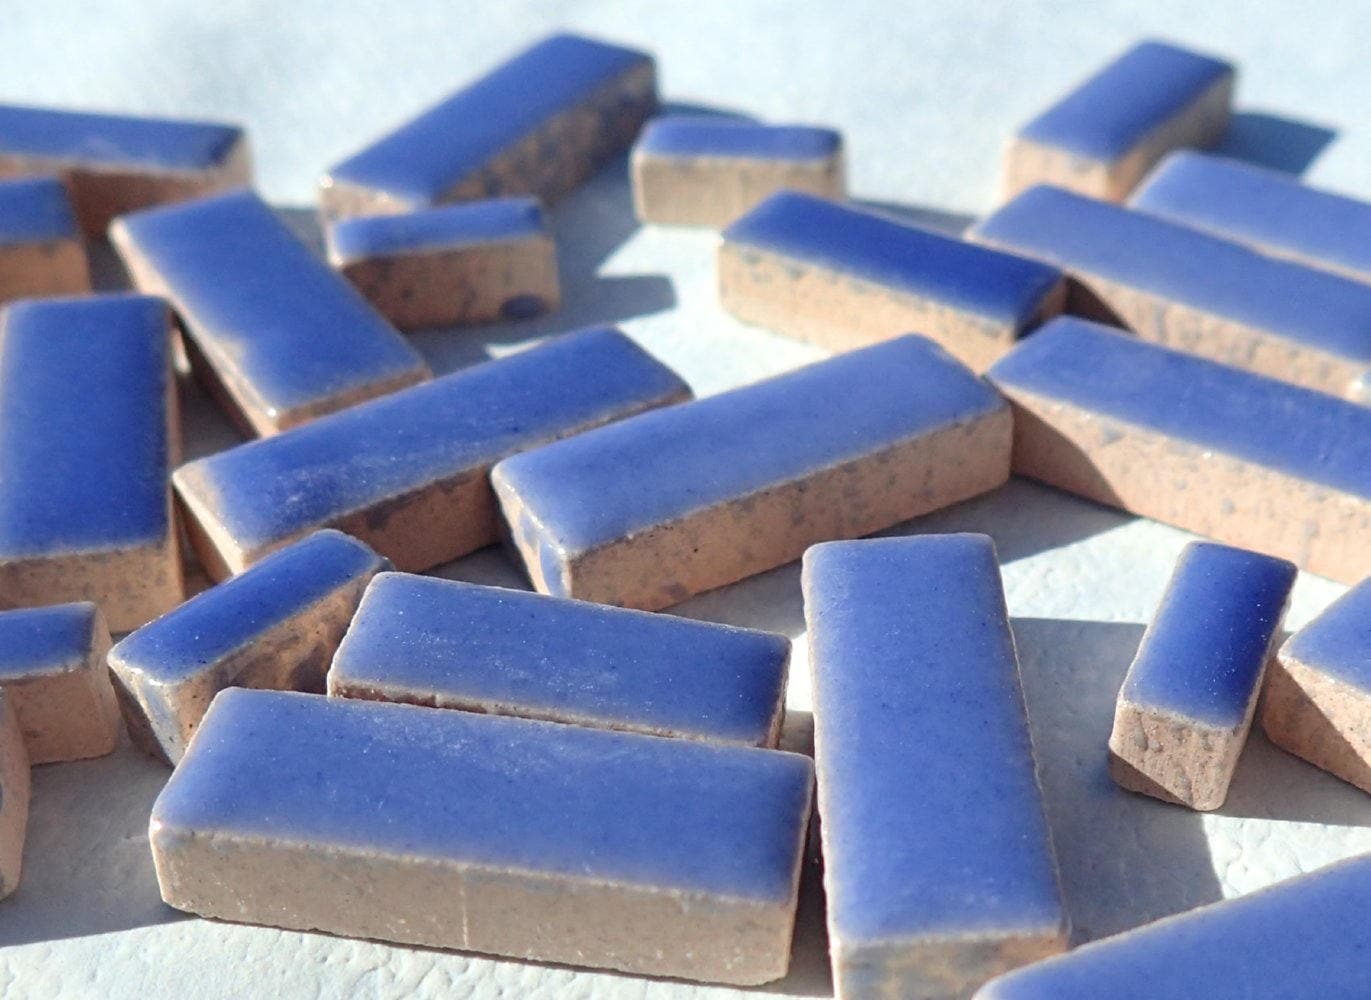 Denim Blue Mini Rectangles Mosaic Tiles - 50g Ceramic in Mix of 3 Sizes 3/8" and 5/8" and 3/4" in Delphinium